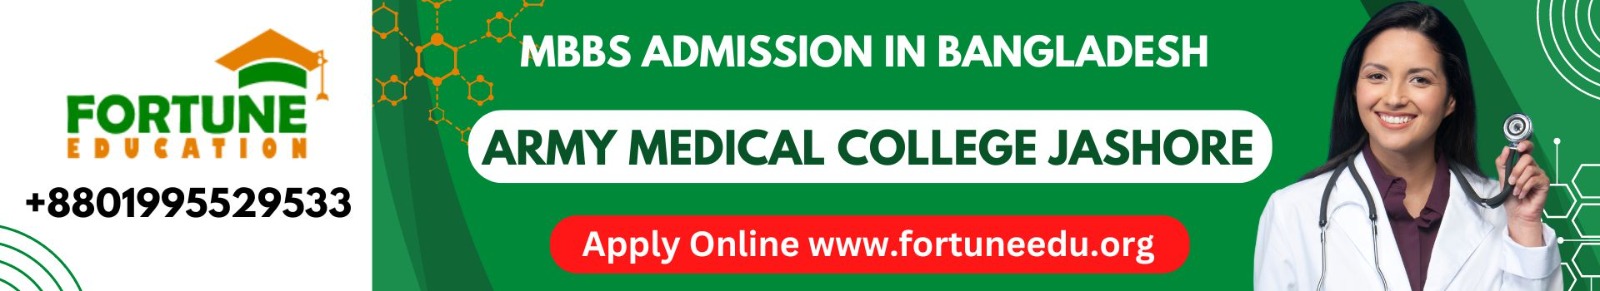 MBBS Admission Open